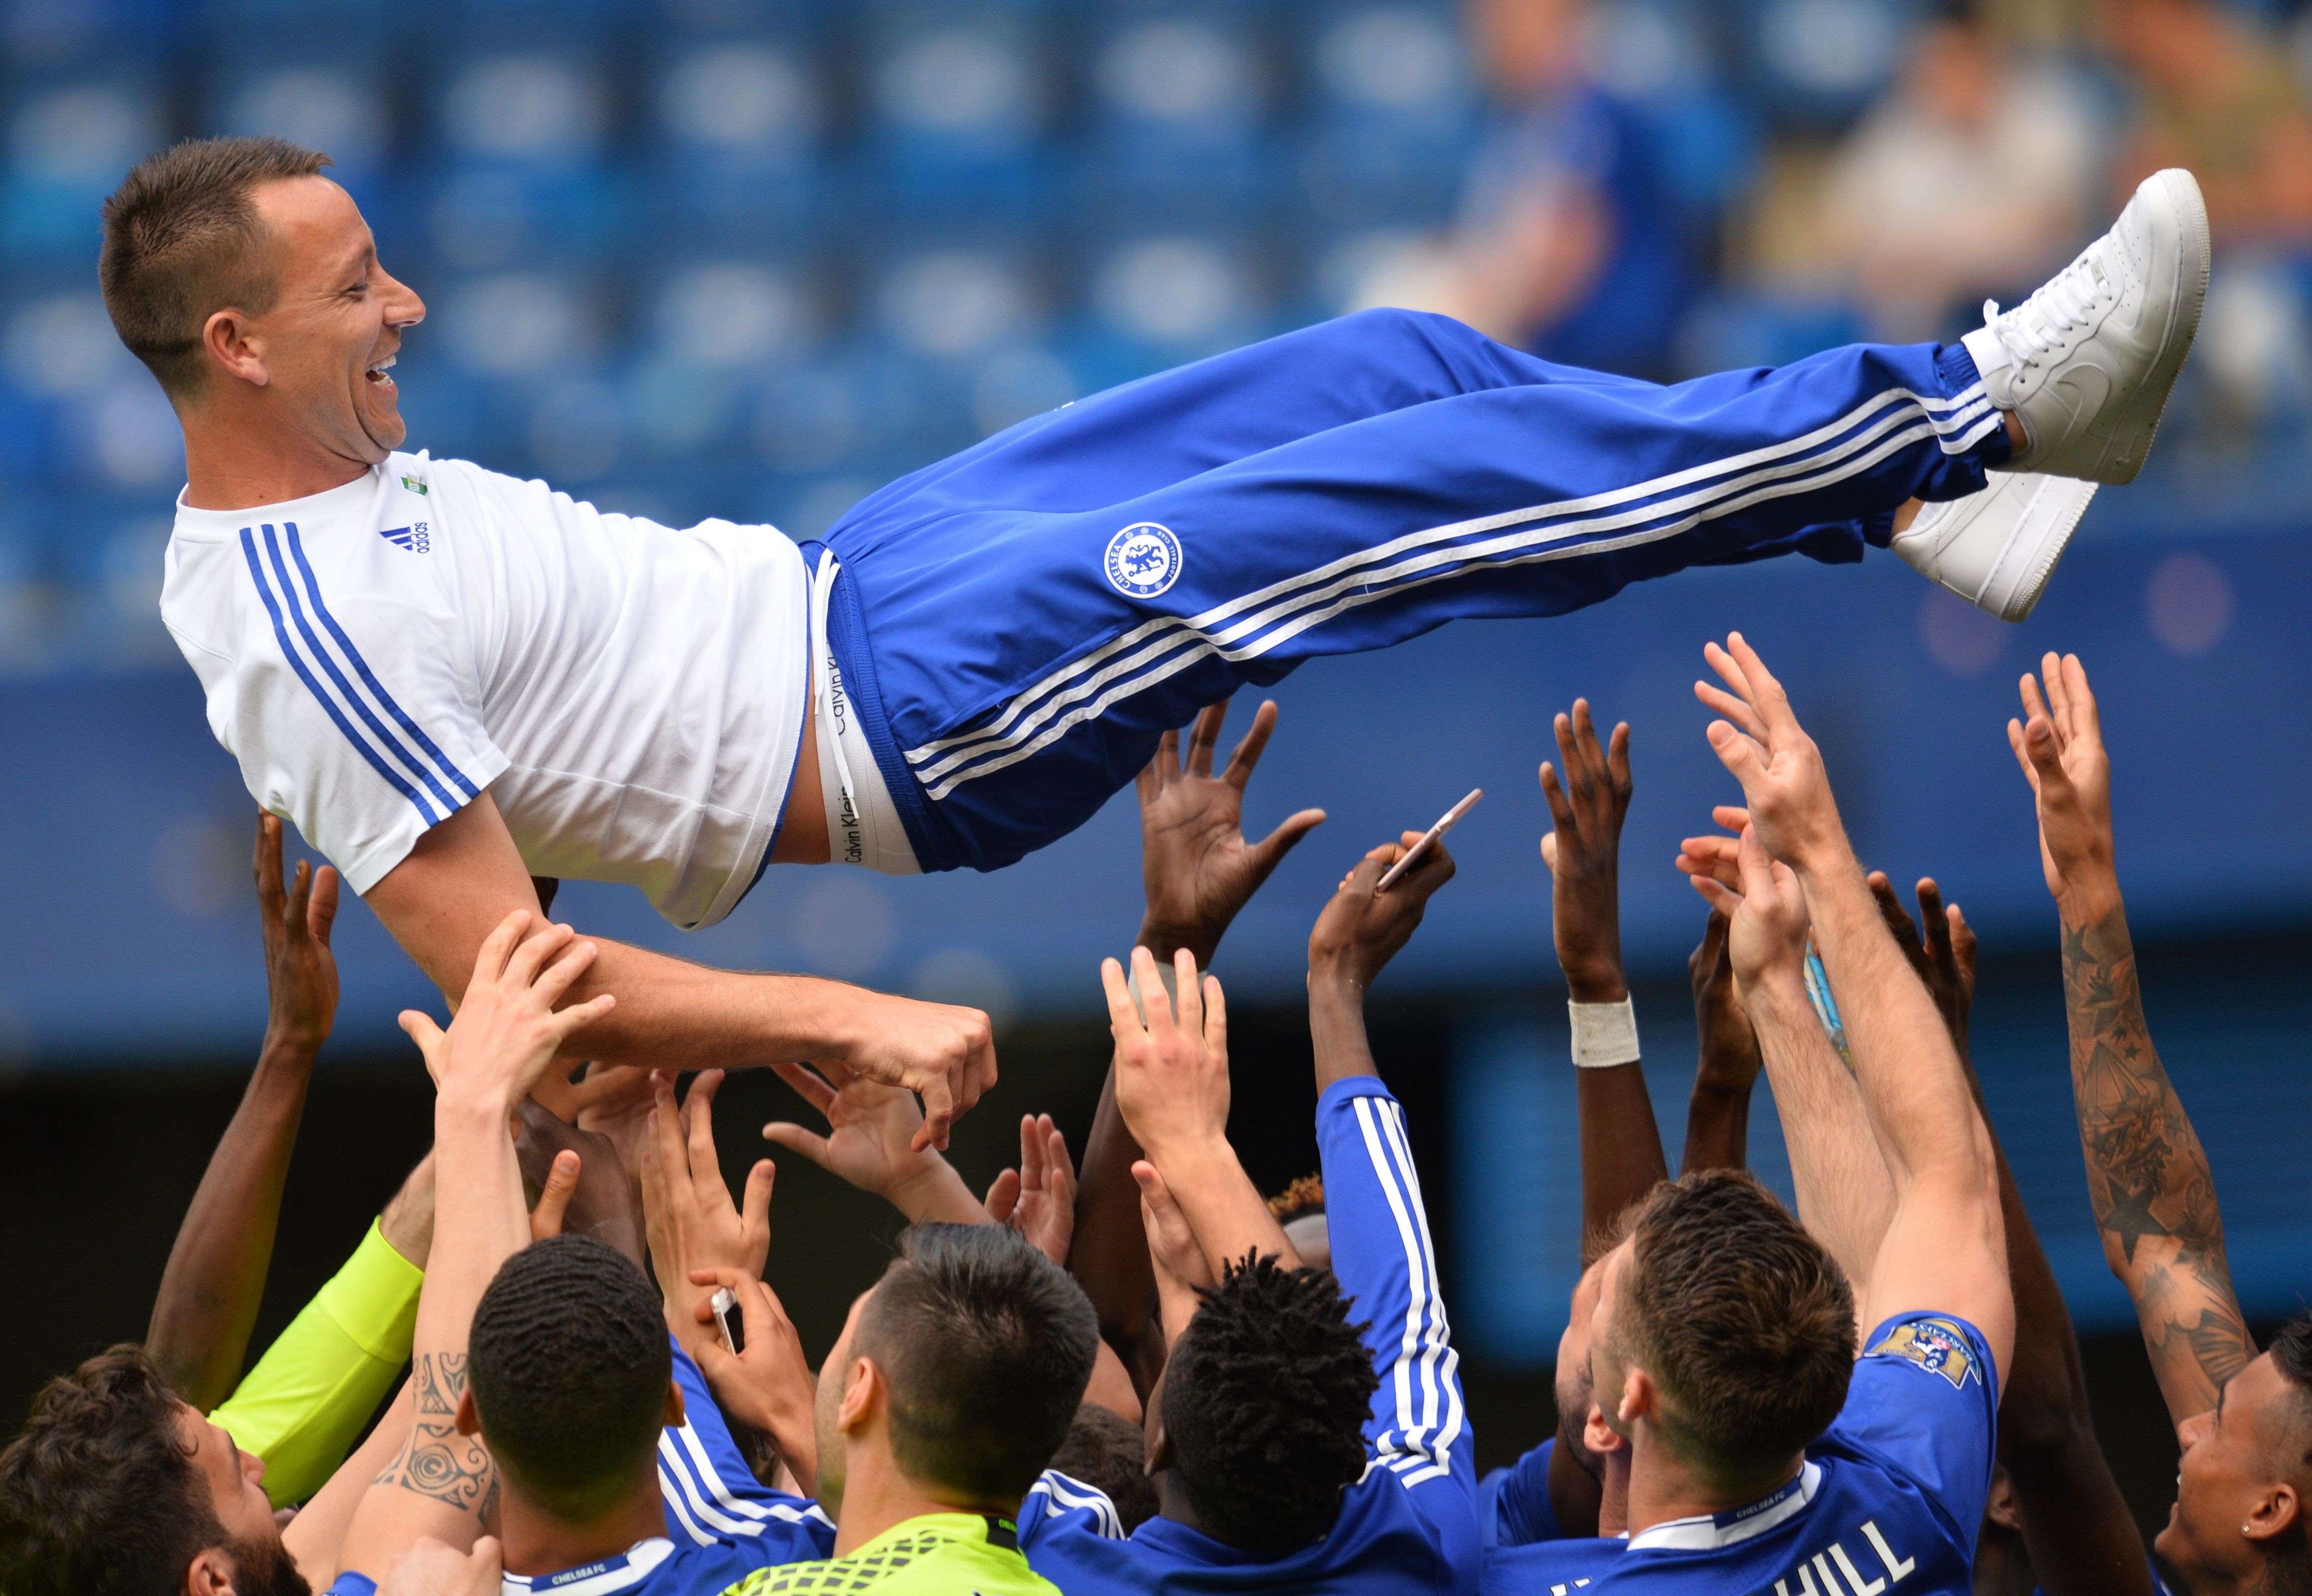 Chelsea captain John Terry is thrown in the air by teammates after the 1-1 draw with new champions Leicester City at Stamford Bridge. Terry, suspended for the game, said: “I want to stay. The club knows that, the fans know that.” Photo: AFP